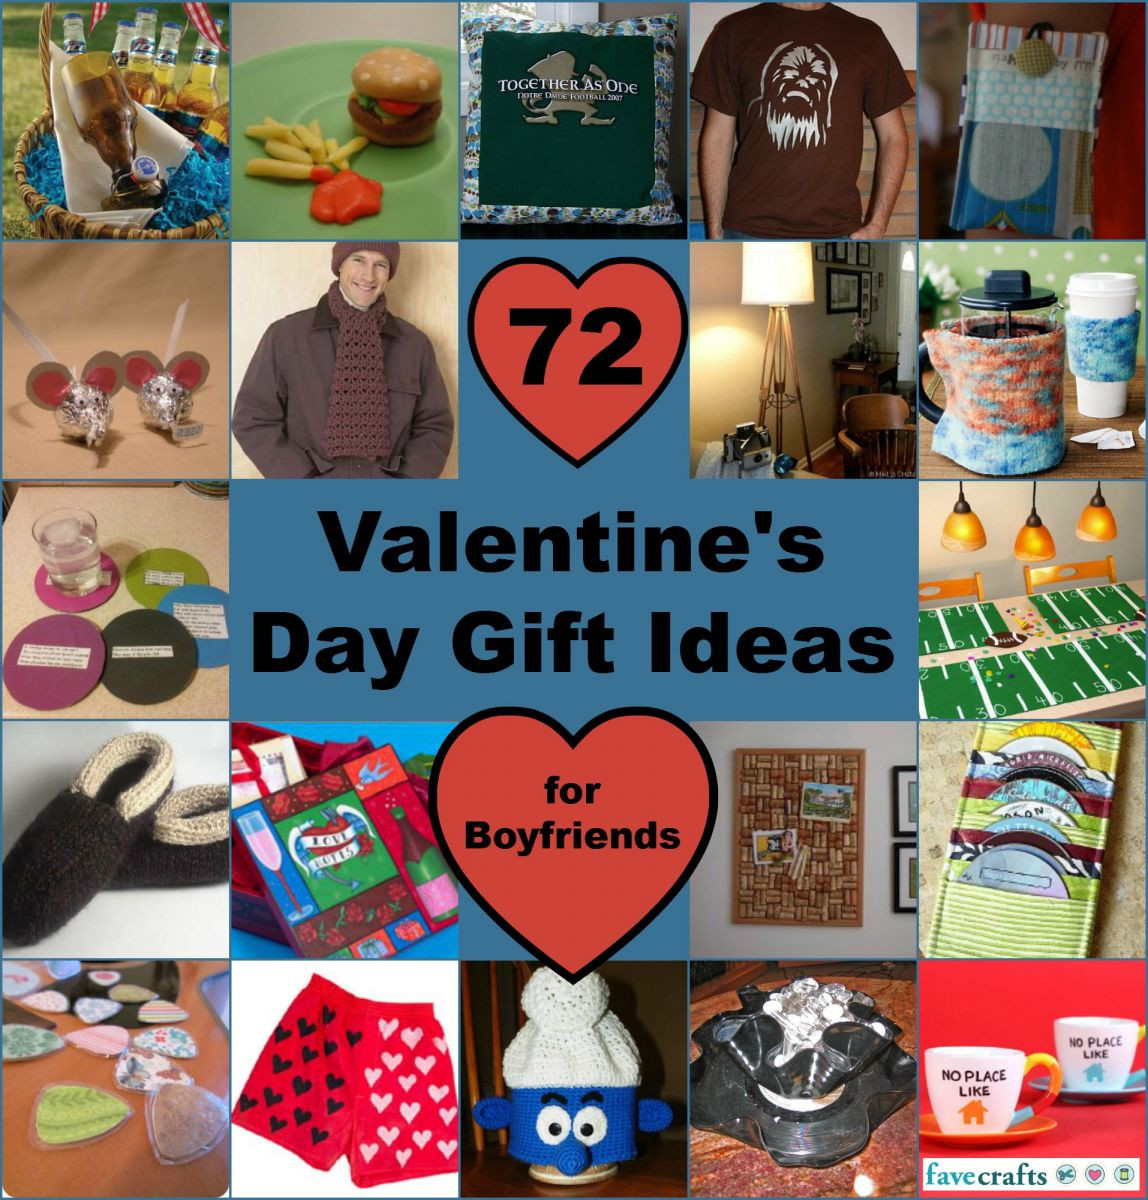 Ideas For Valentine Gift For Boyfriend
 Top 15 Favorite Valentine s Arts and Crafts Videos and